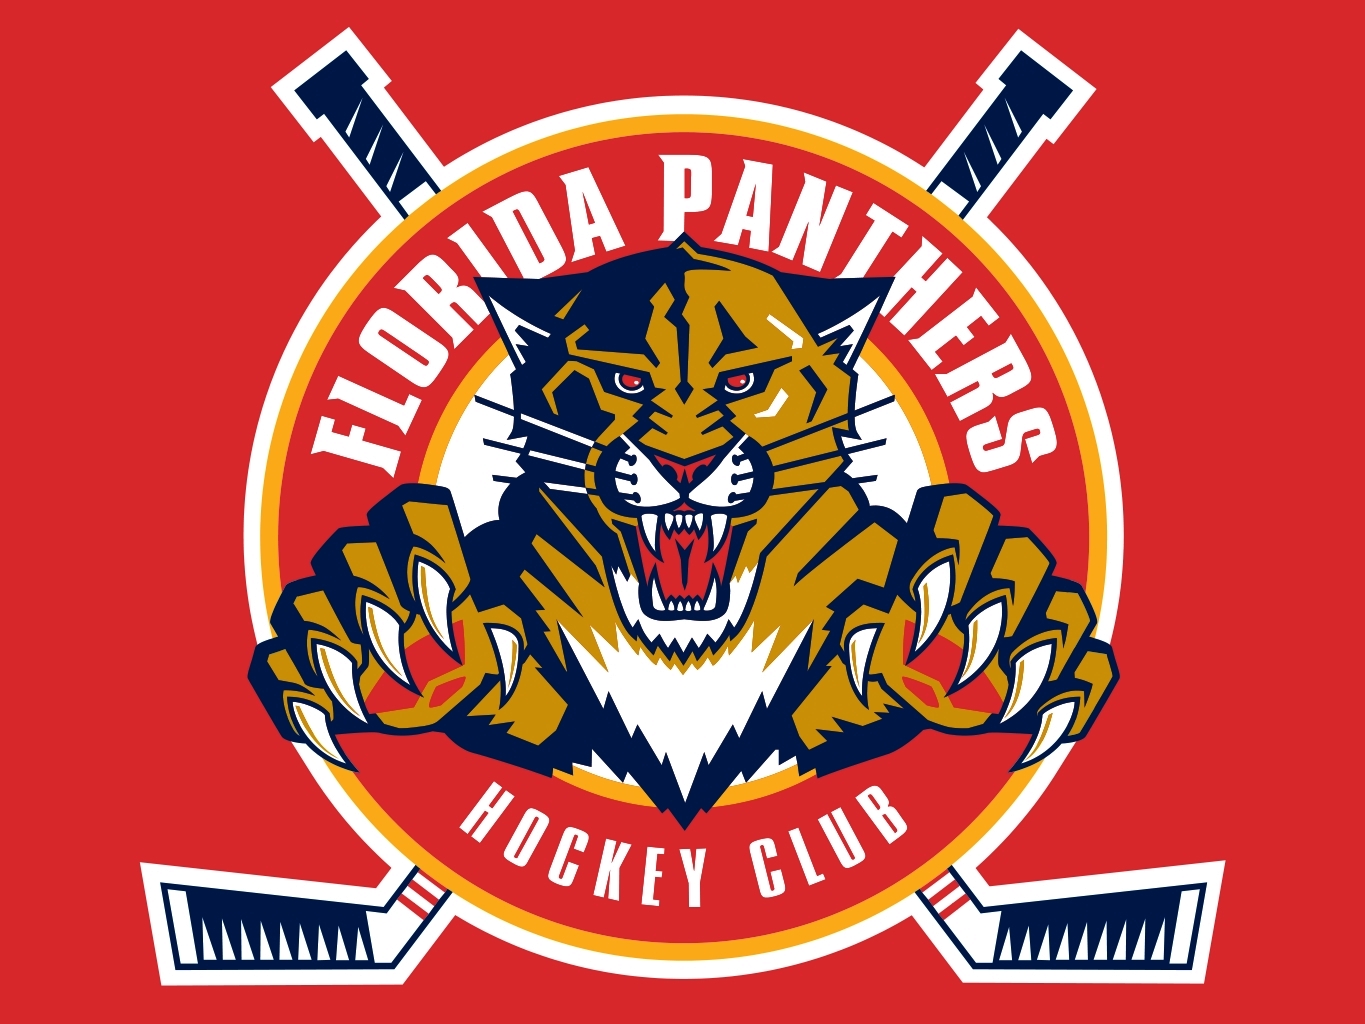 The Florida Panthers Toronto's Other NHL Home Team? It's About